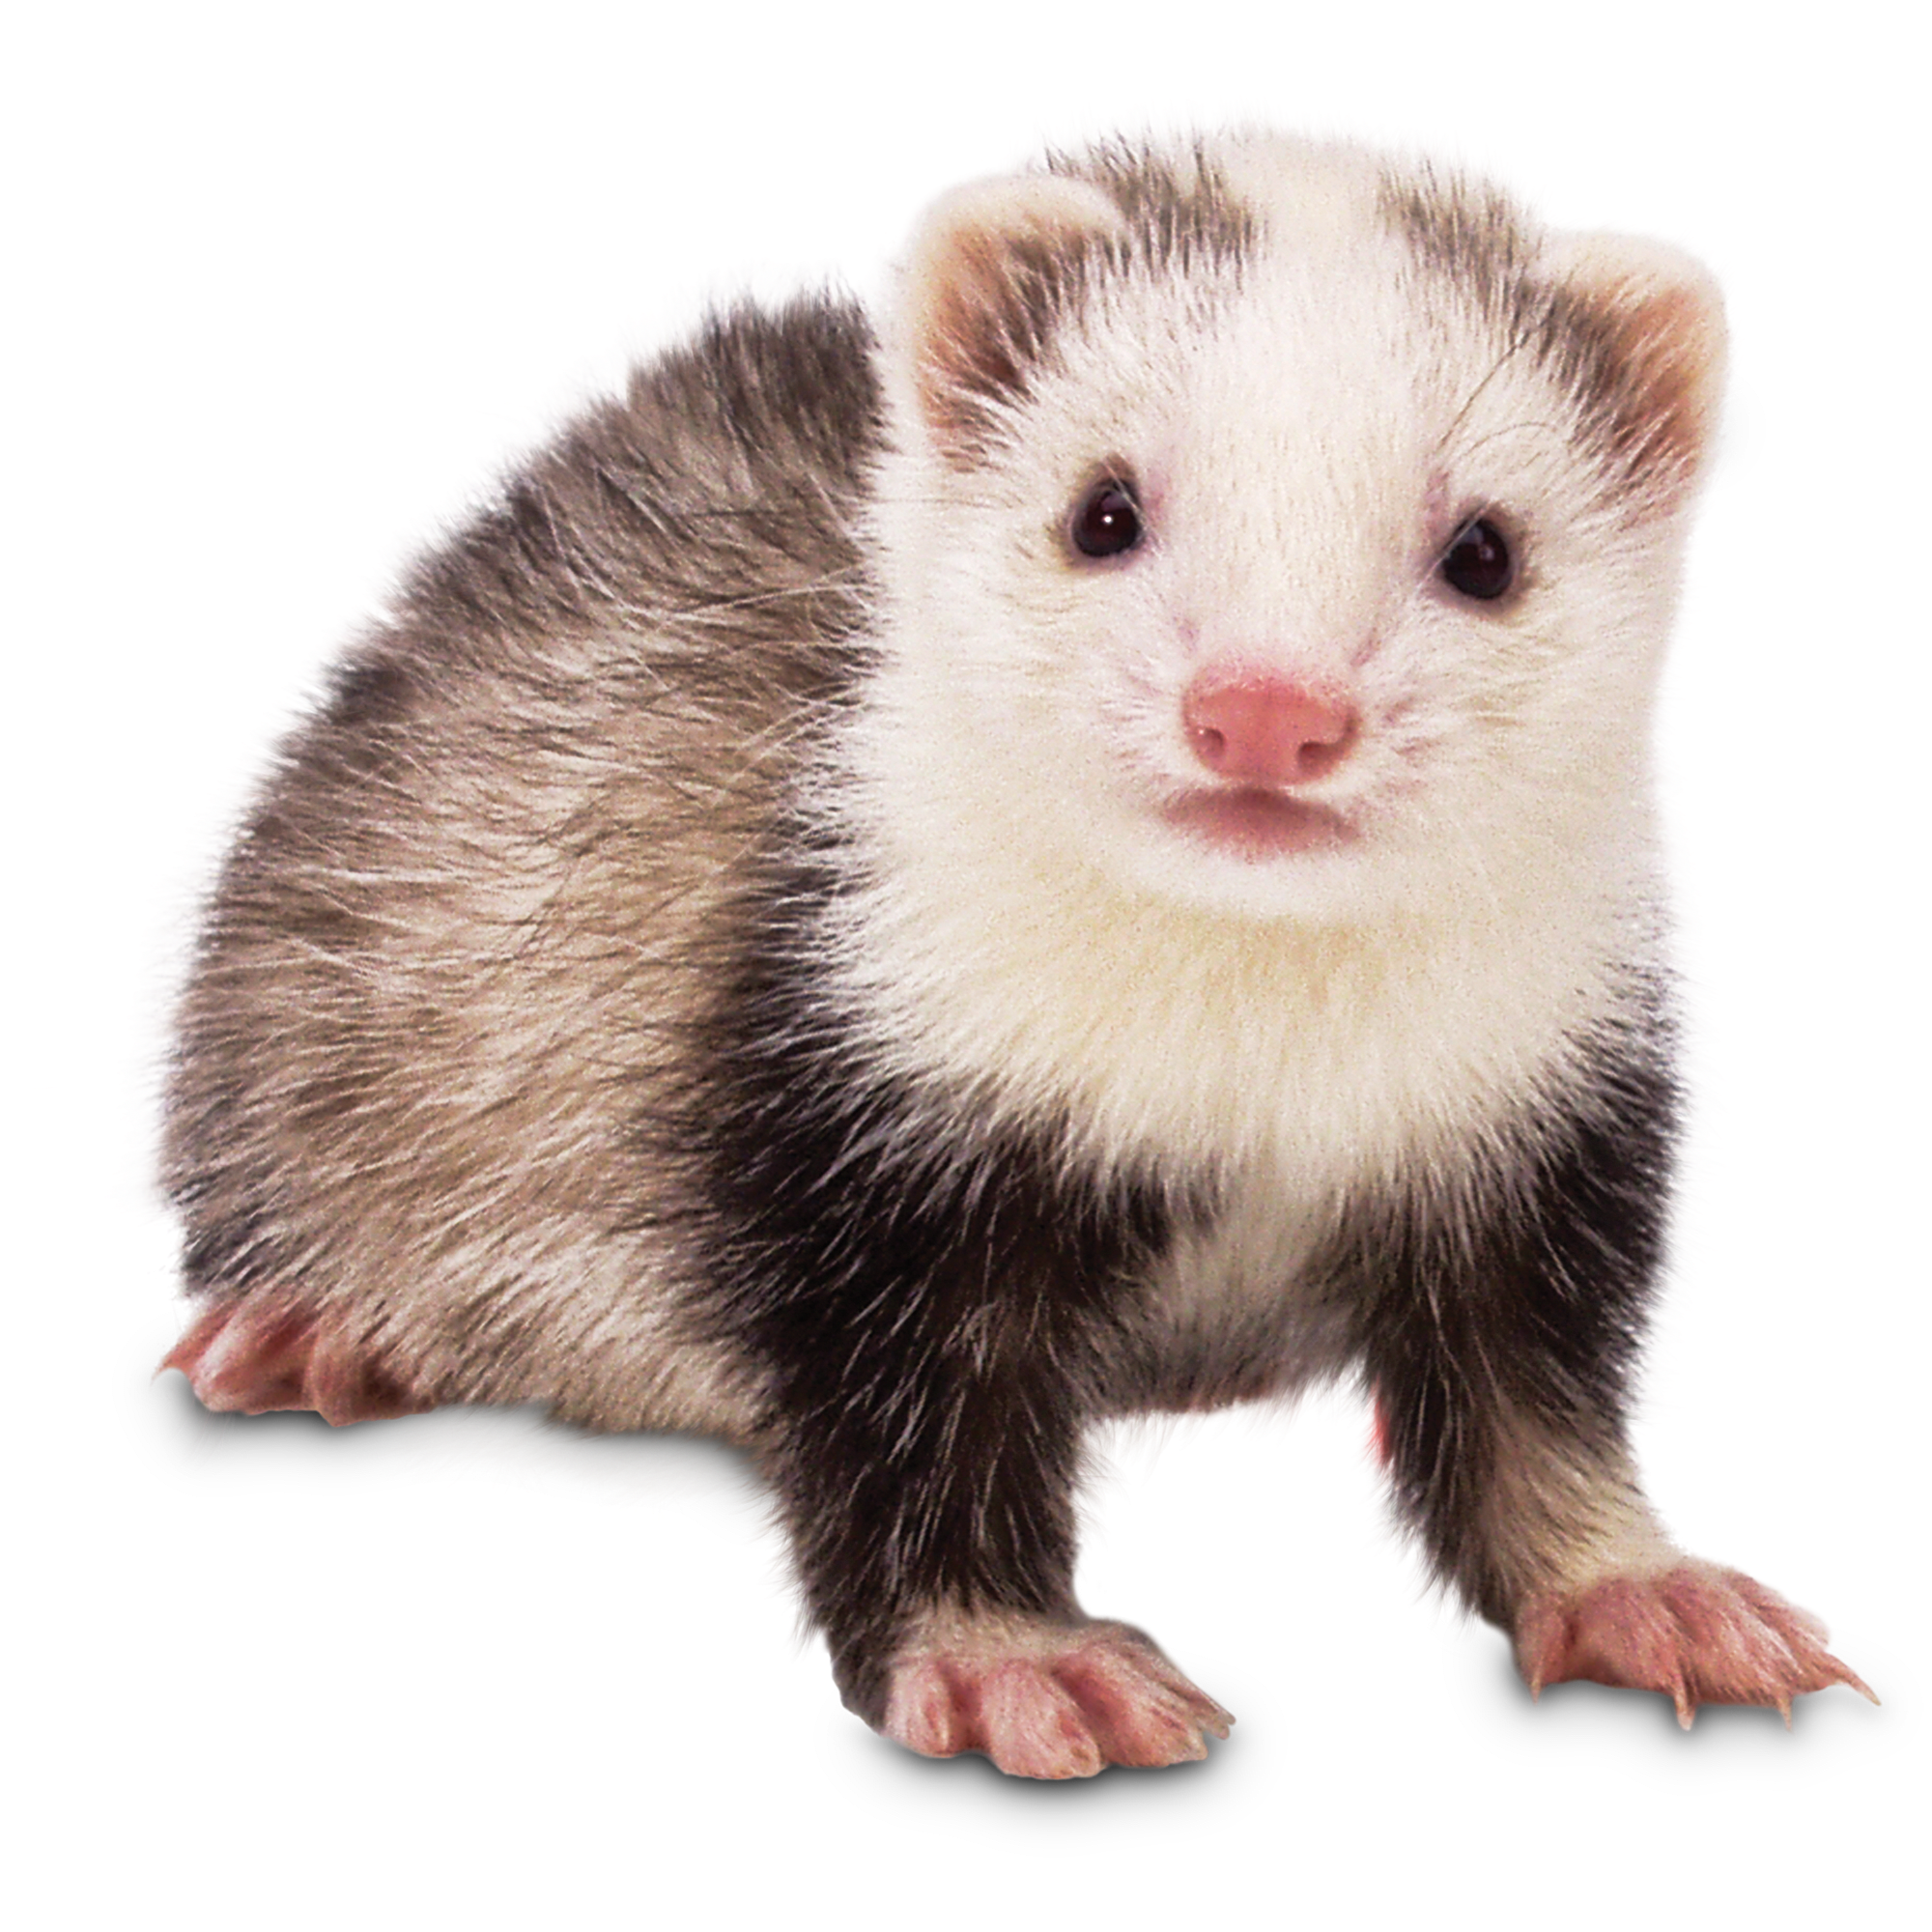 Ferrets for Sale: Live Pet Ferrets for Sale | Petco